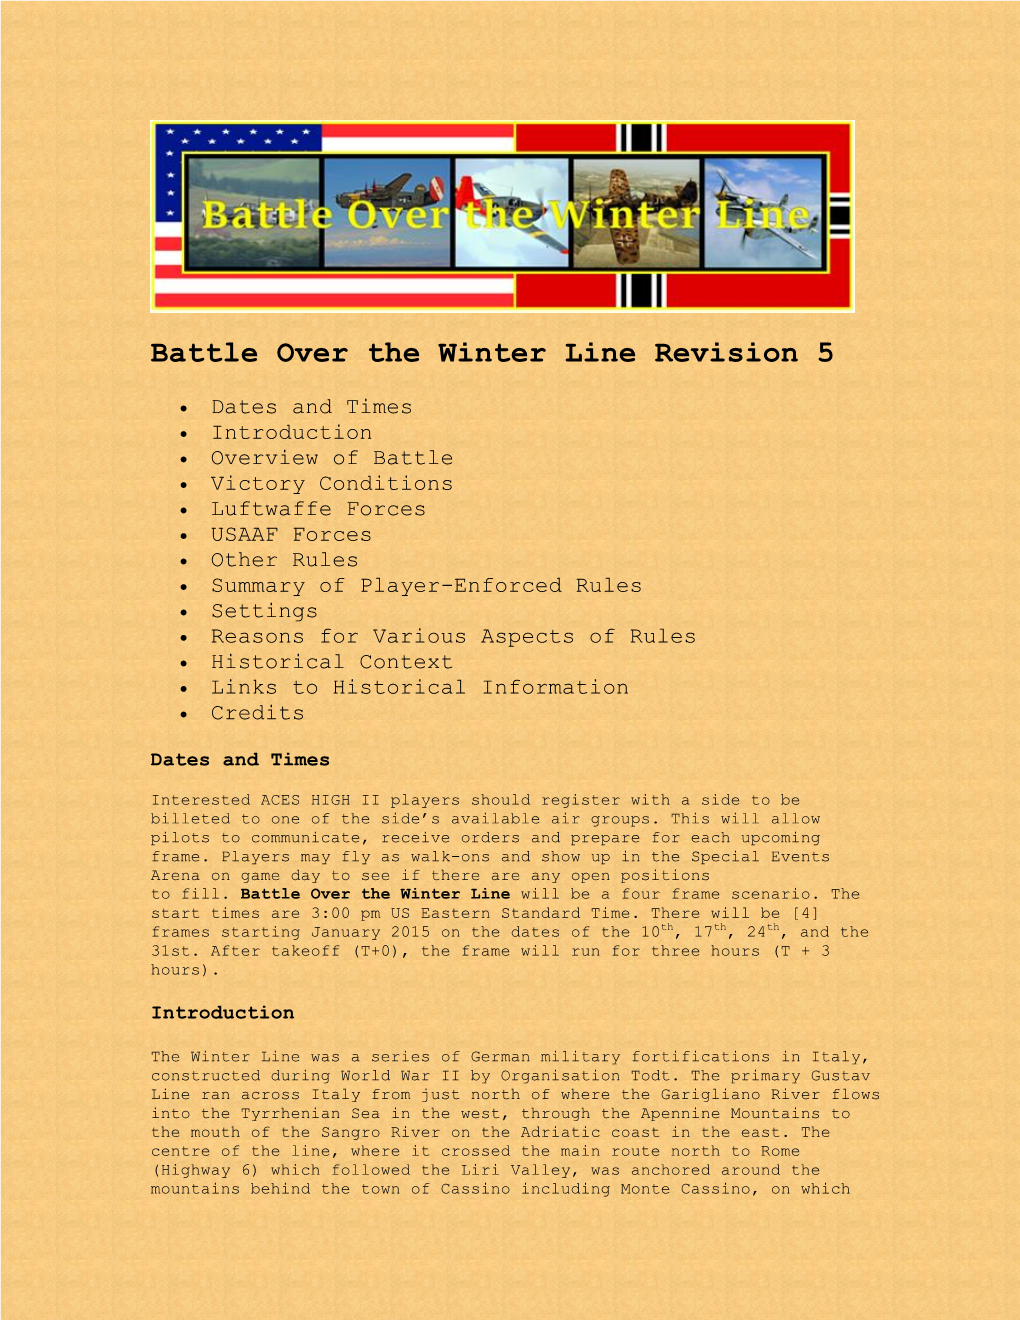 Battle Over the Winter Line Revision 5